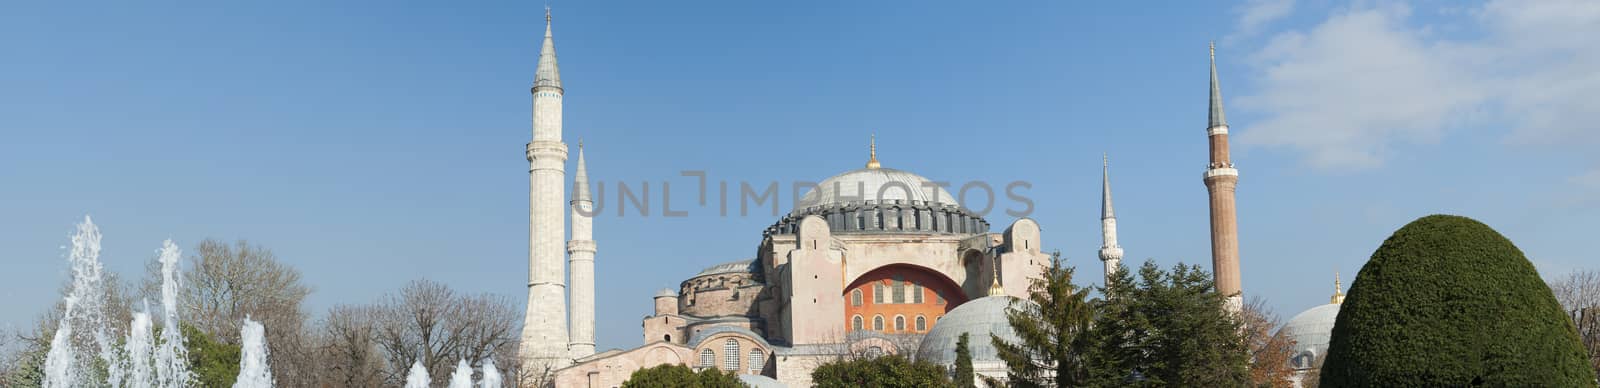 Panoramic exterior view of the famous Hagia Sophia museum in Sultanahmet district of Istanbul Turkey